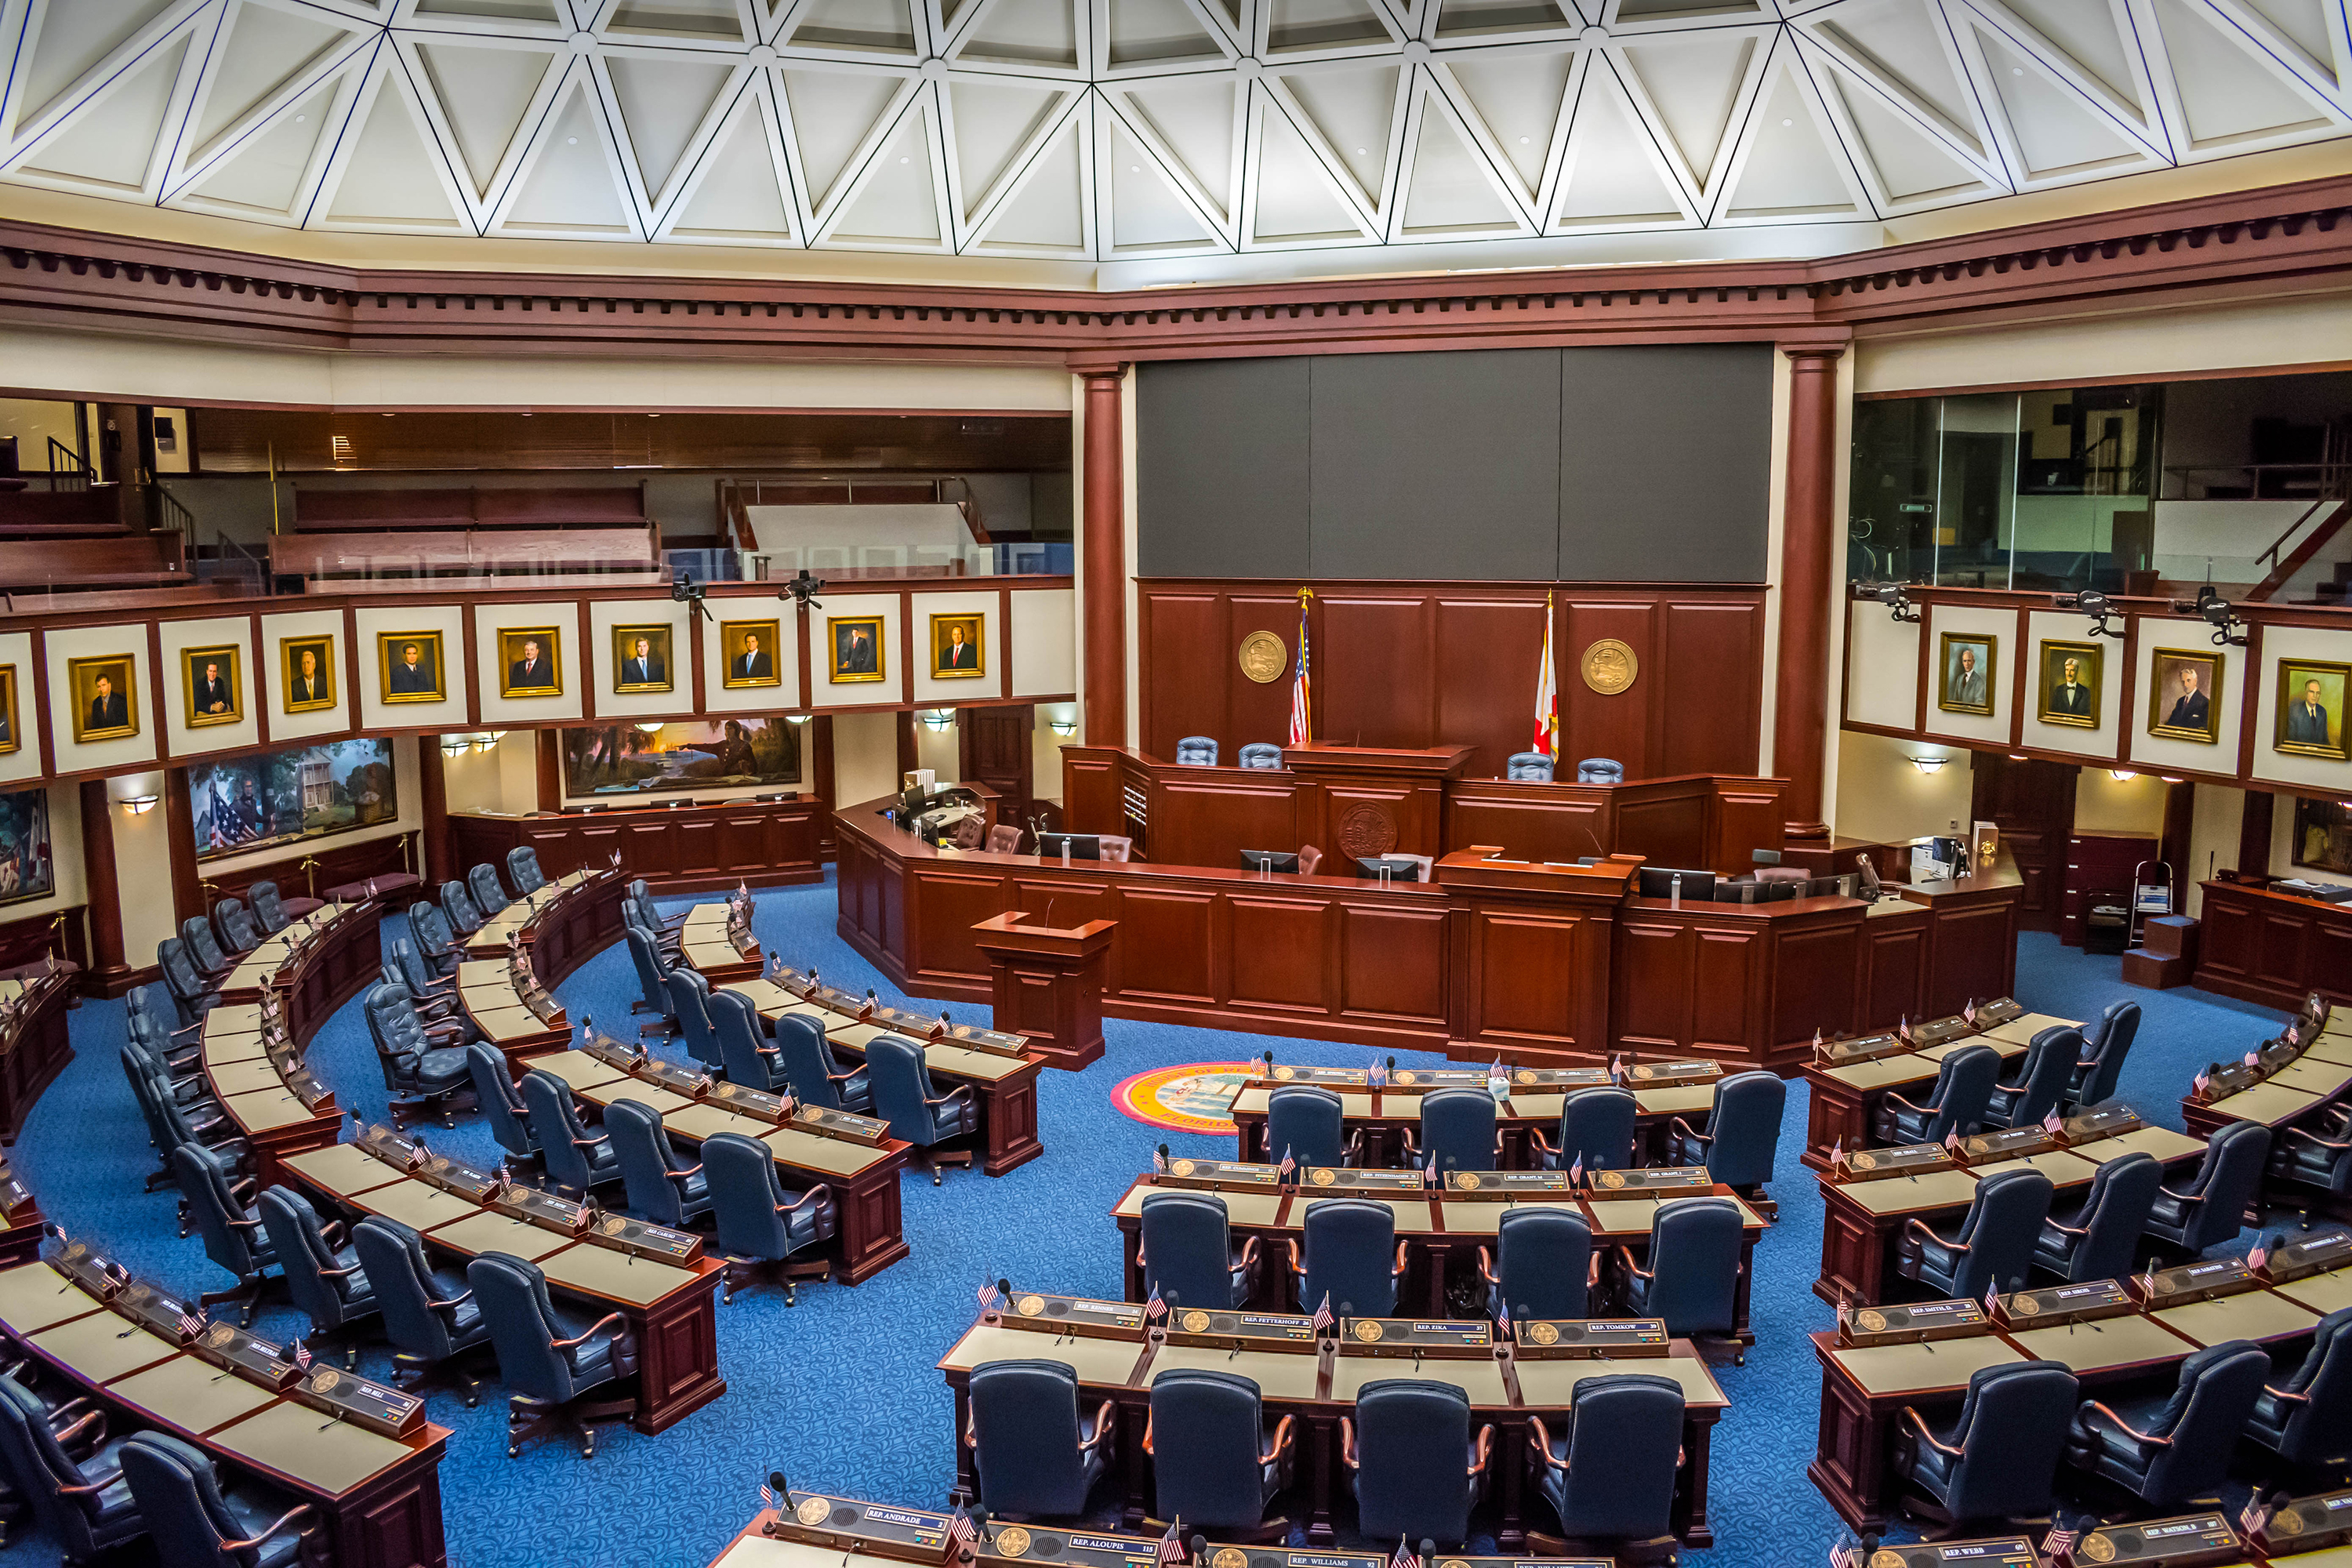 Condo Reform Measure Introduced During Florida Special Session On Property Insurance